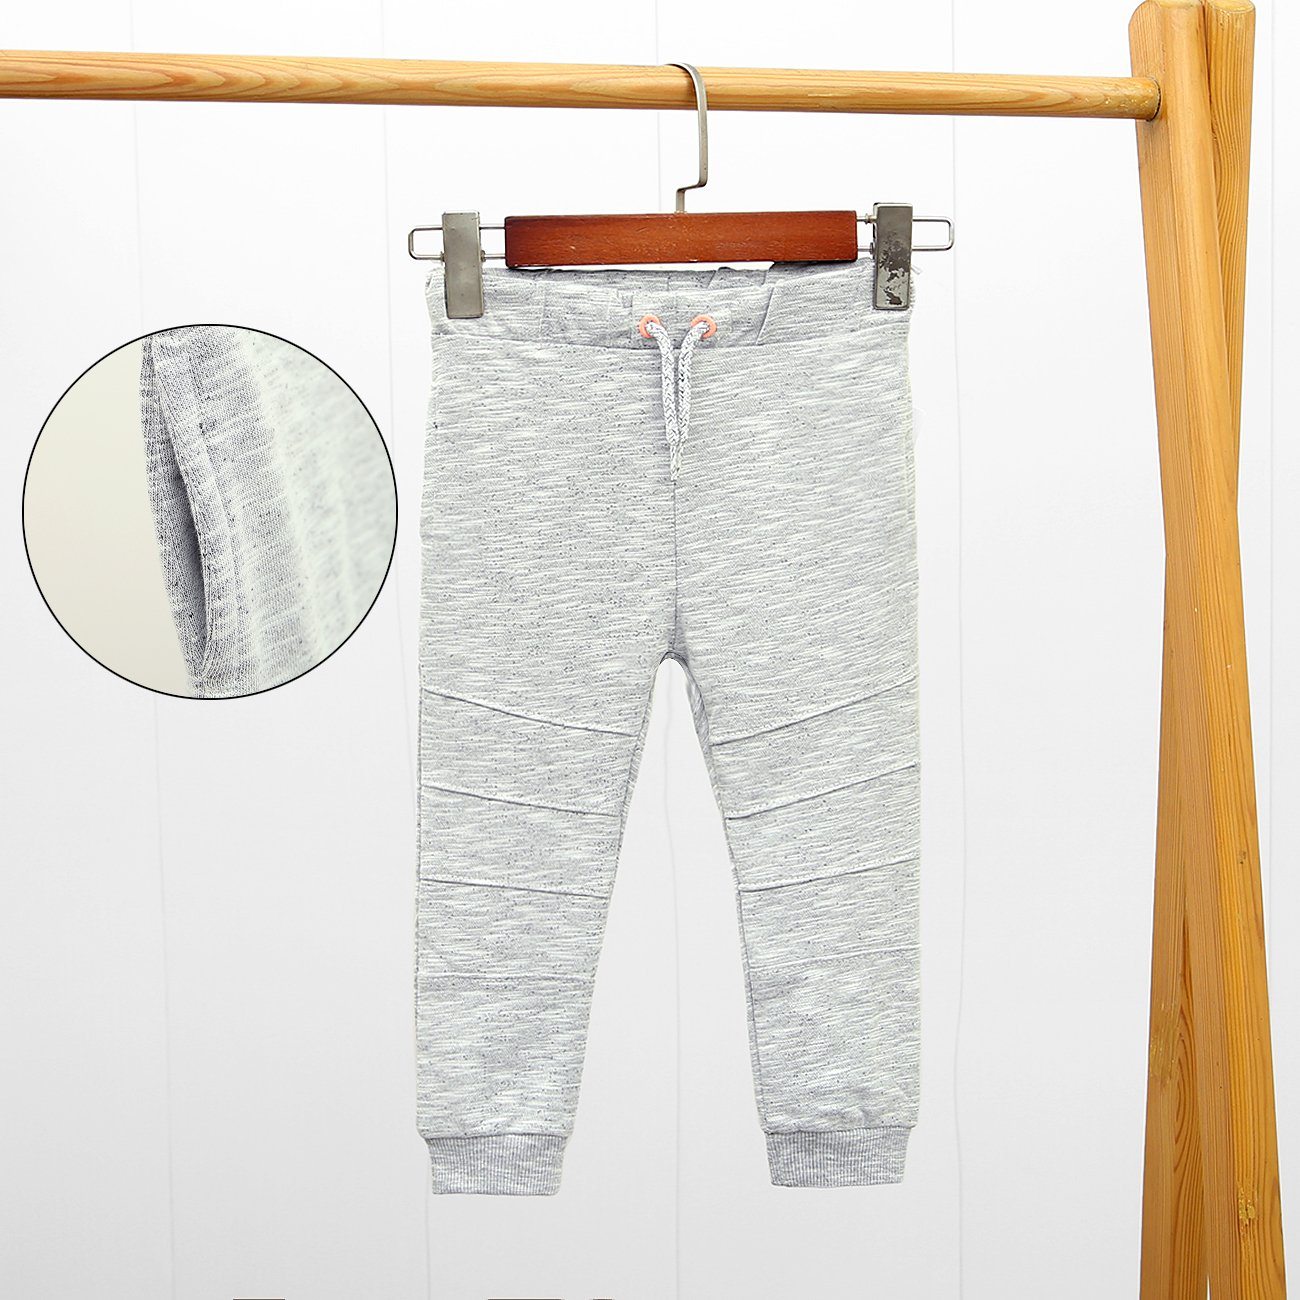 Premium Quality Soft Stretched Printed Jogger Trouser For Girls (21973)